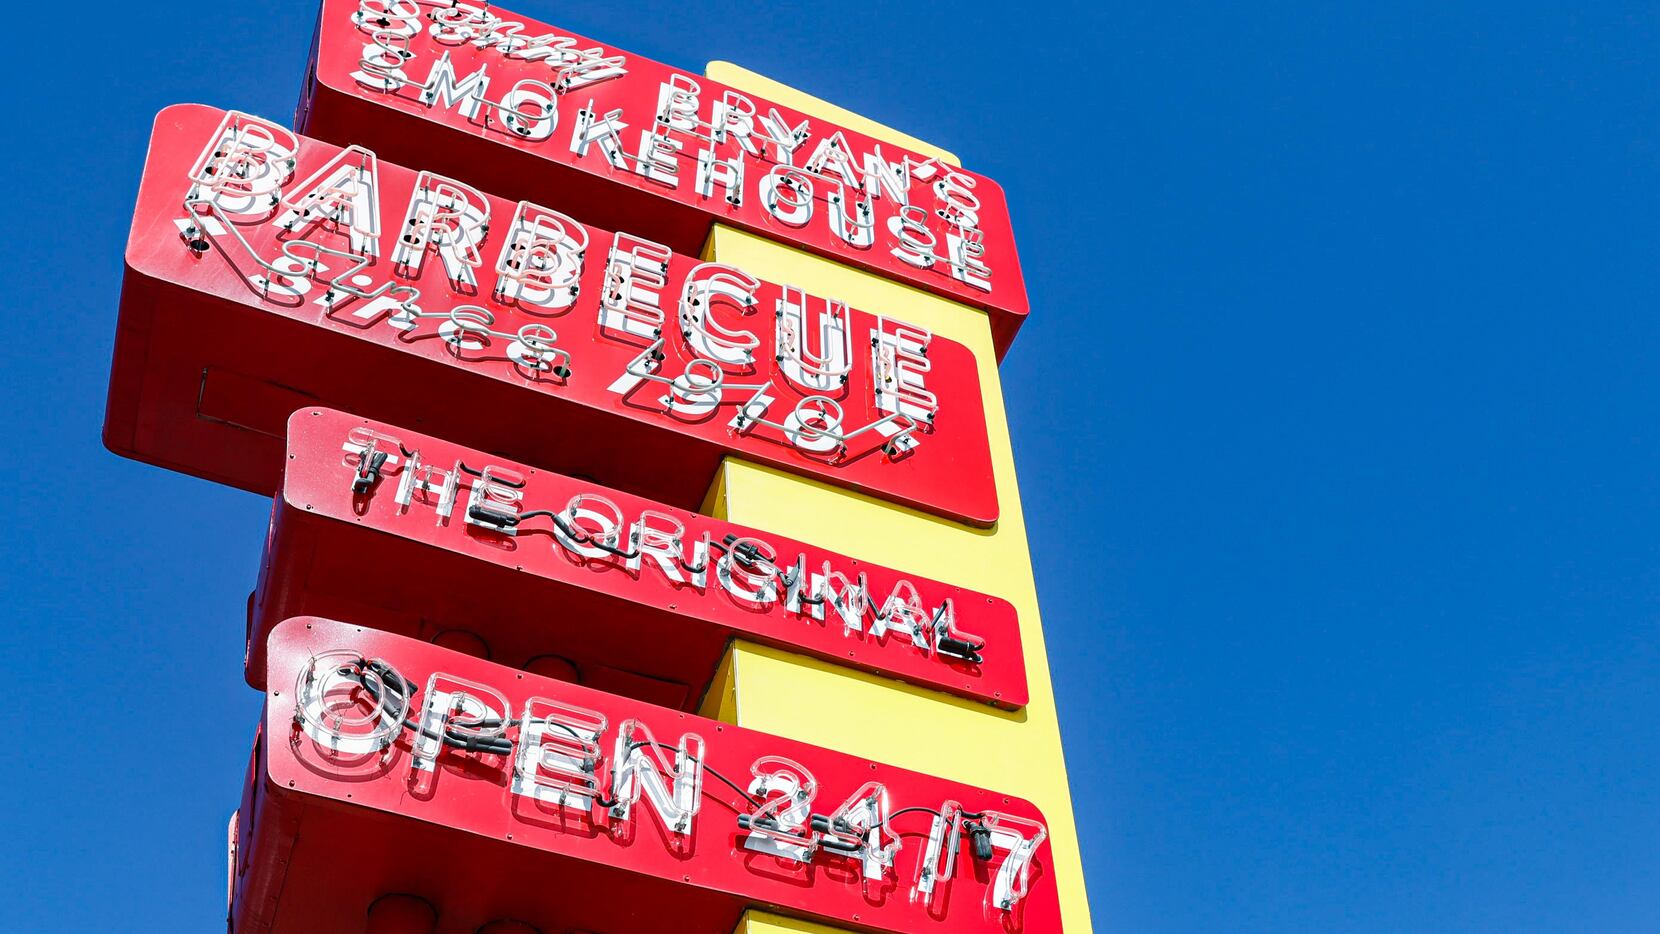 The original Sonny Bryan's opened 64 years ago, in 1958 on Inwood Road in Dallas. For many...